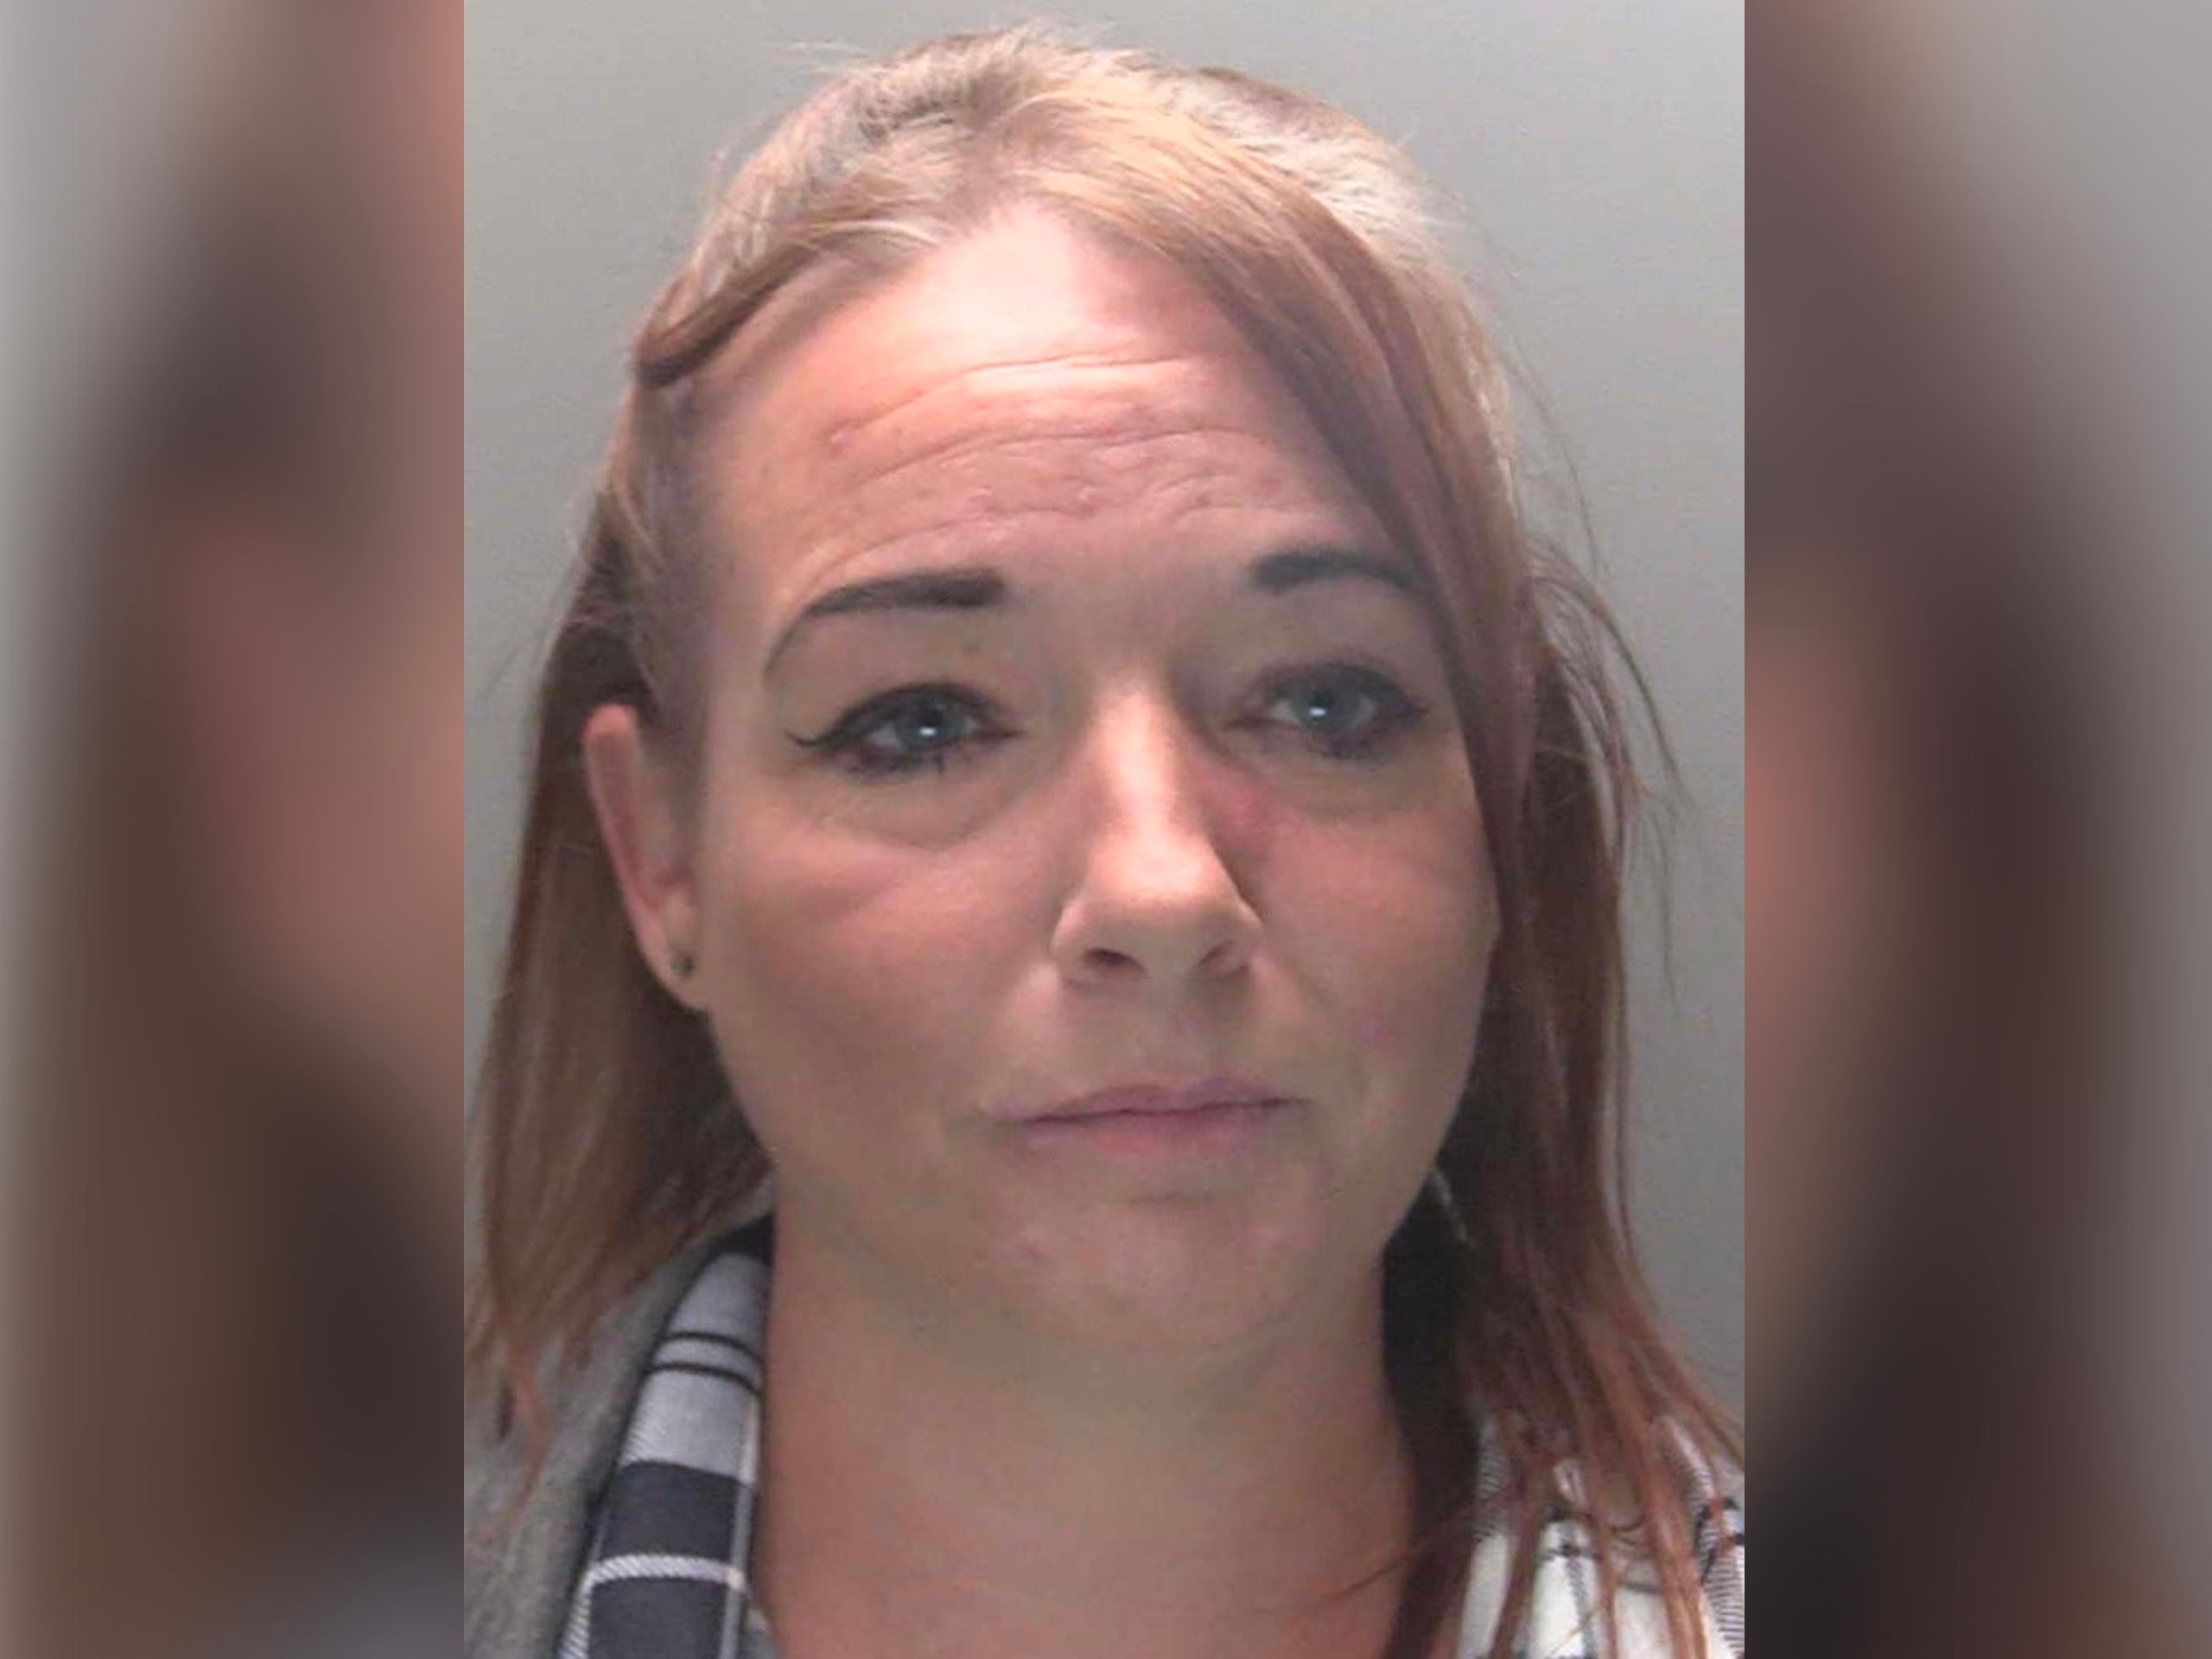 Anne Marie Crook was sentenced to four years and eight months imprisonment and was disqualified from driving for a period of five years and three months